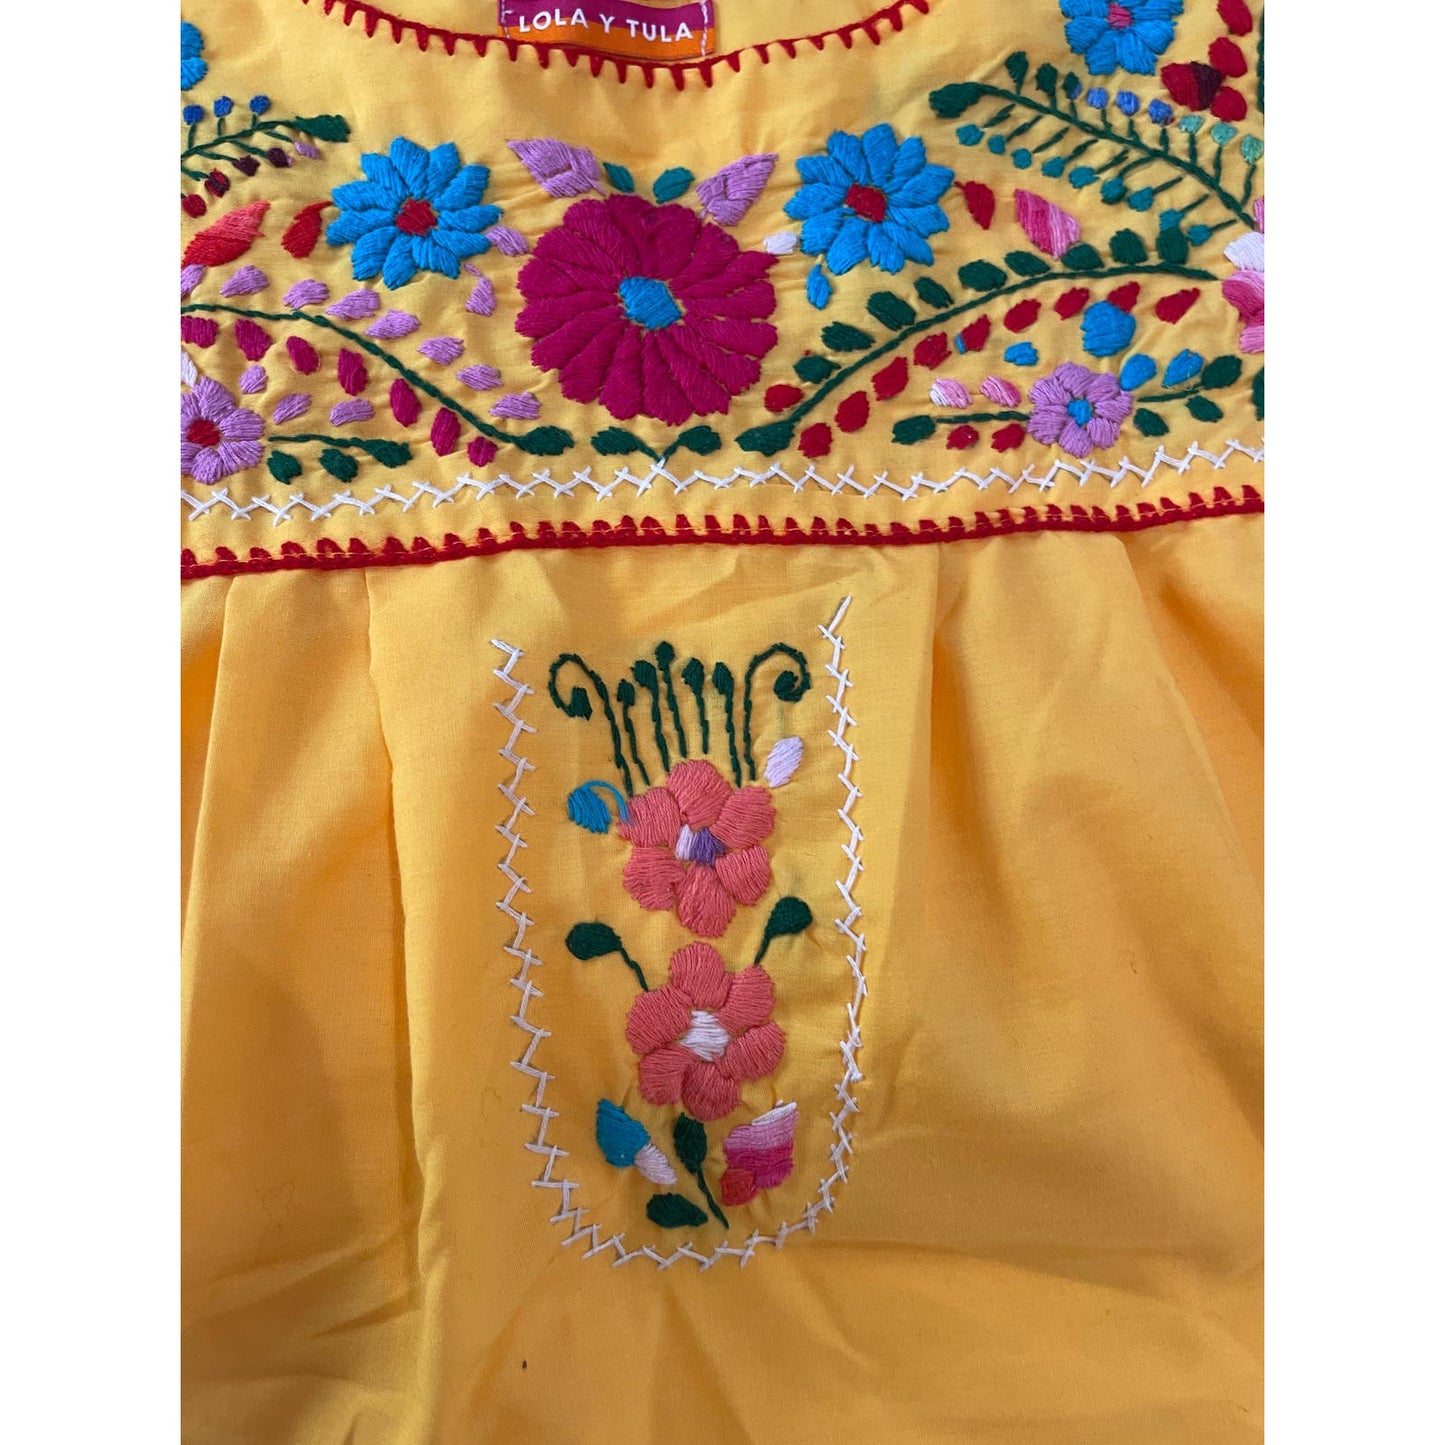 Lola Y Tula Women's Hand Embroidered Yellow Dress Size Med/Large $98 MSRP